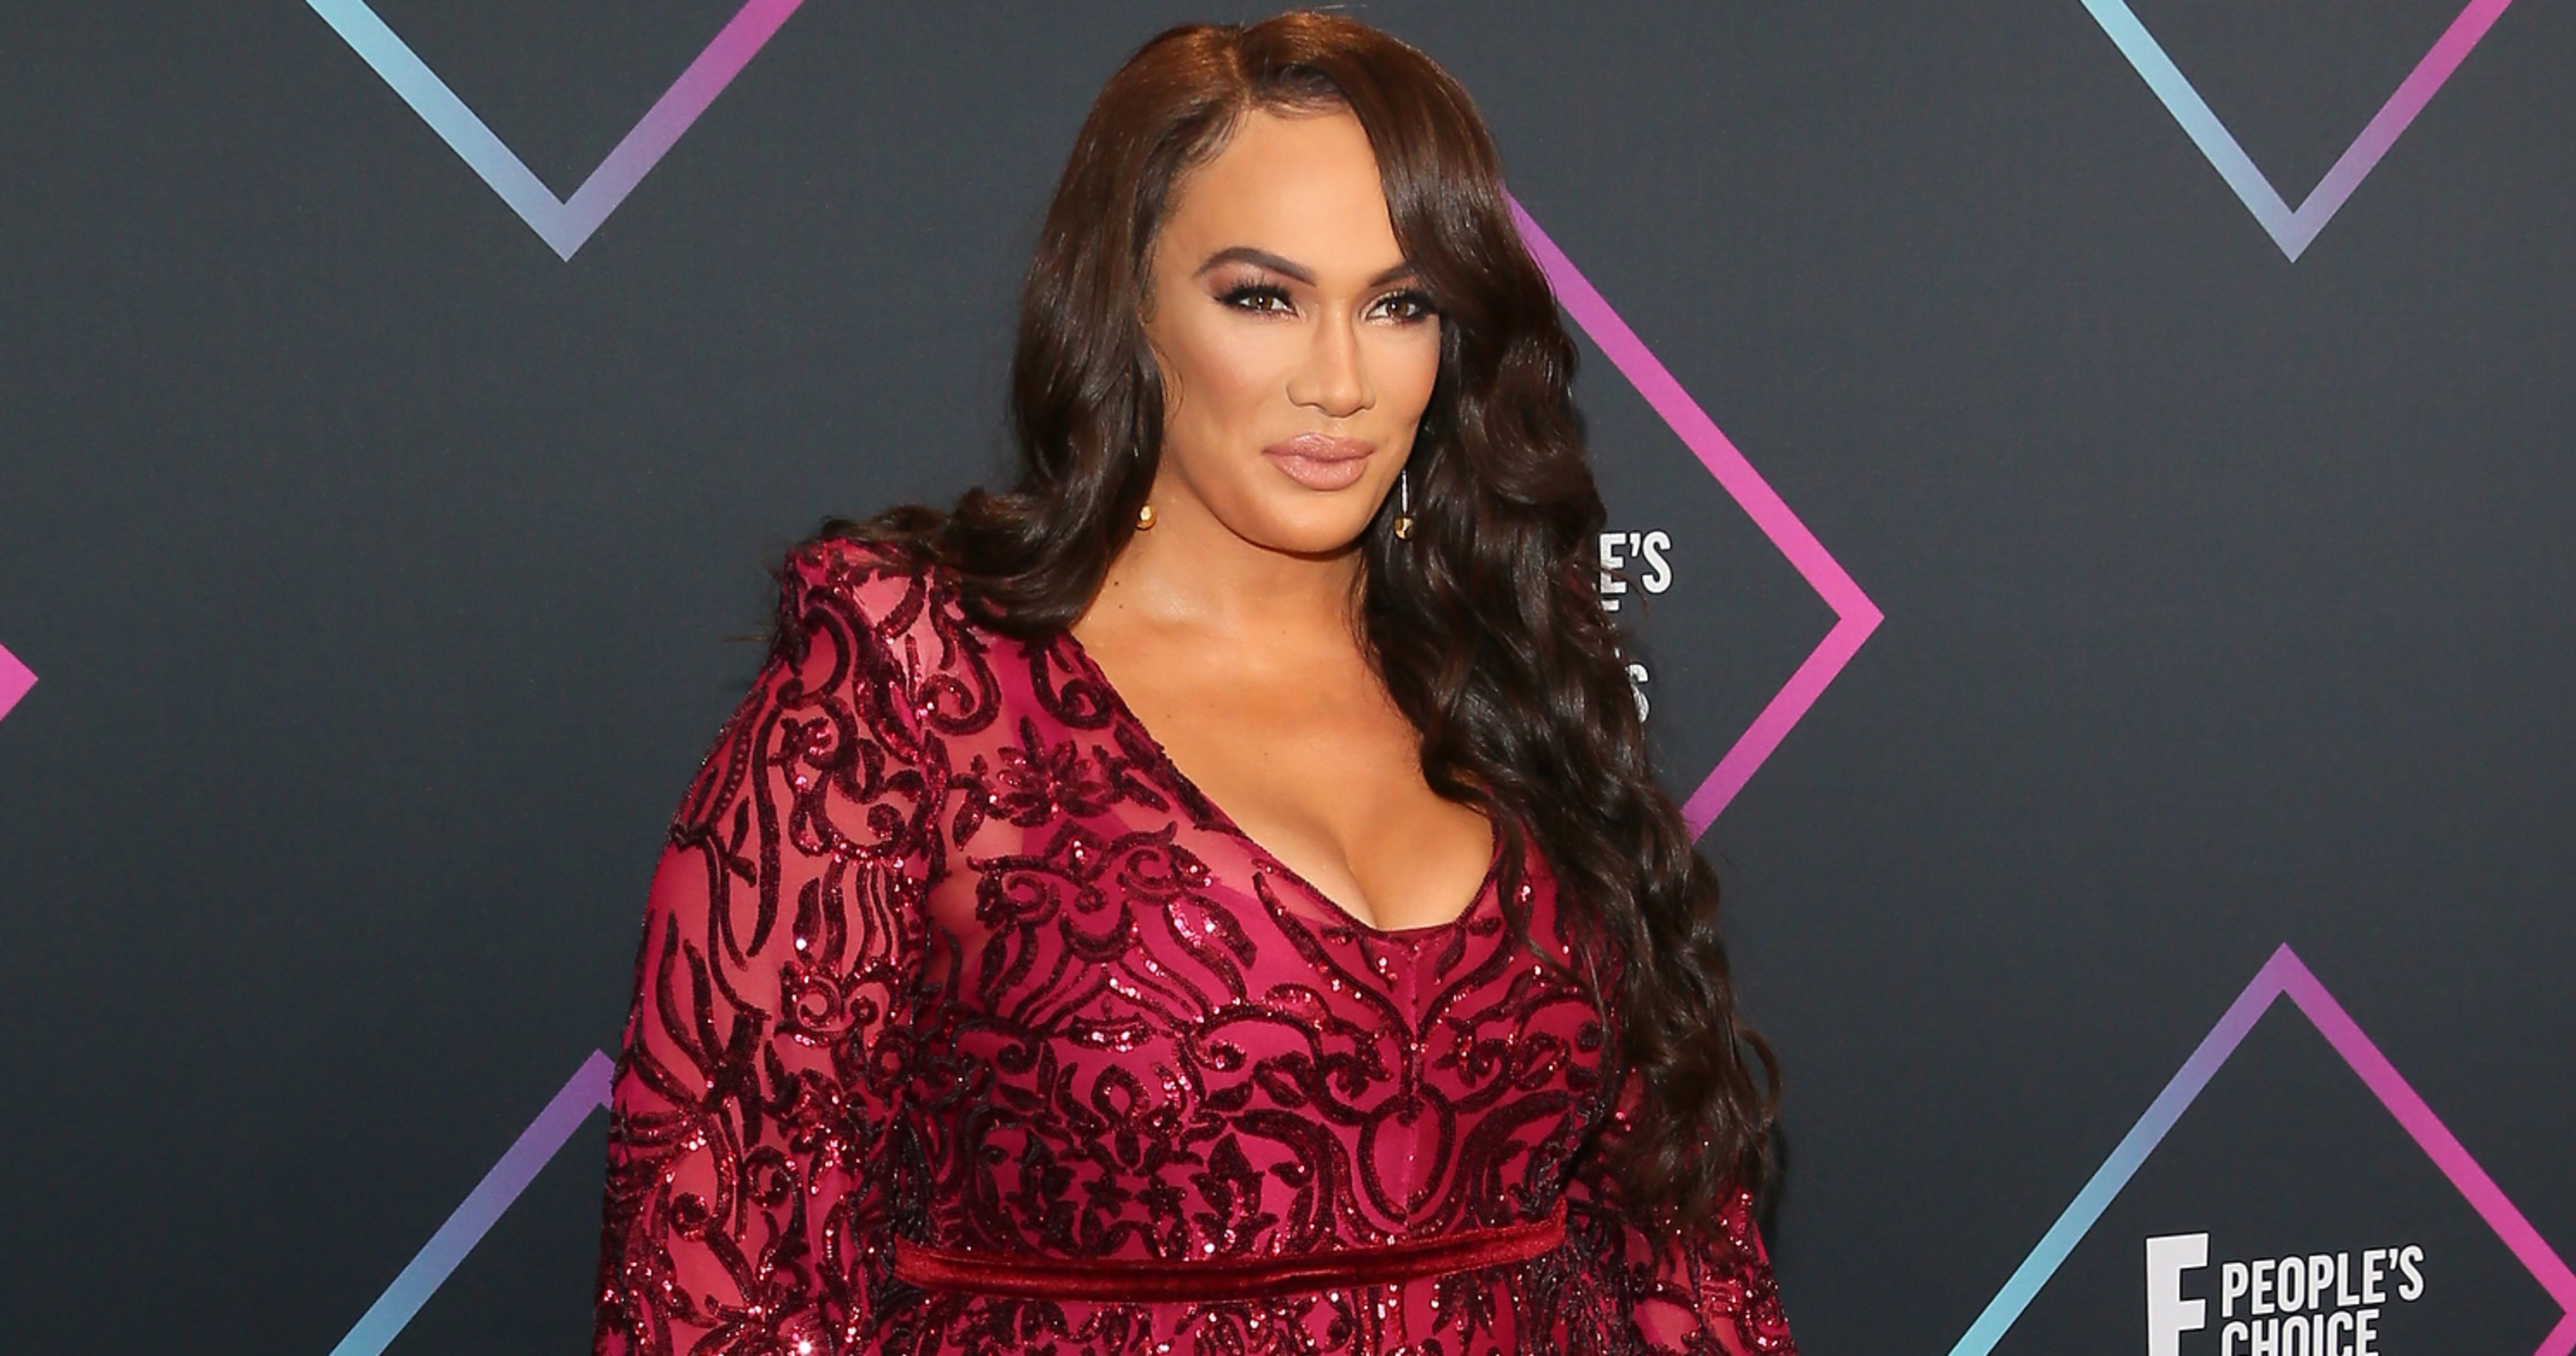 Nia Jax Discusses Mental Health in Statement After WWE Release News